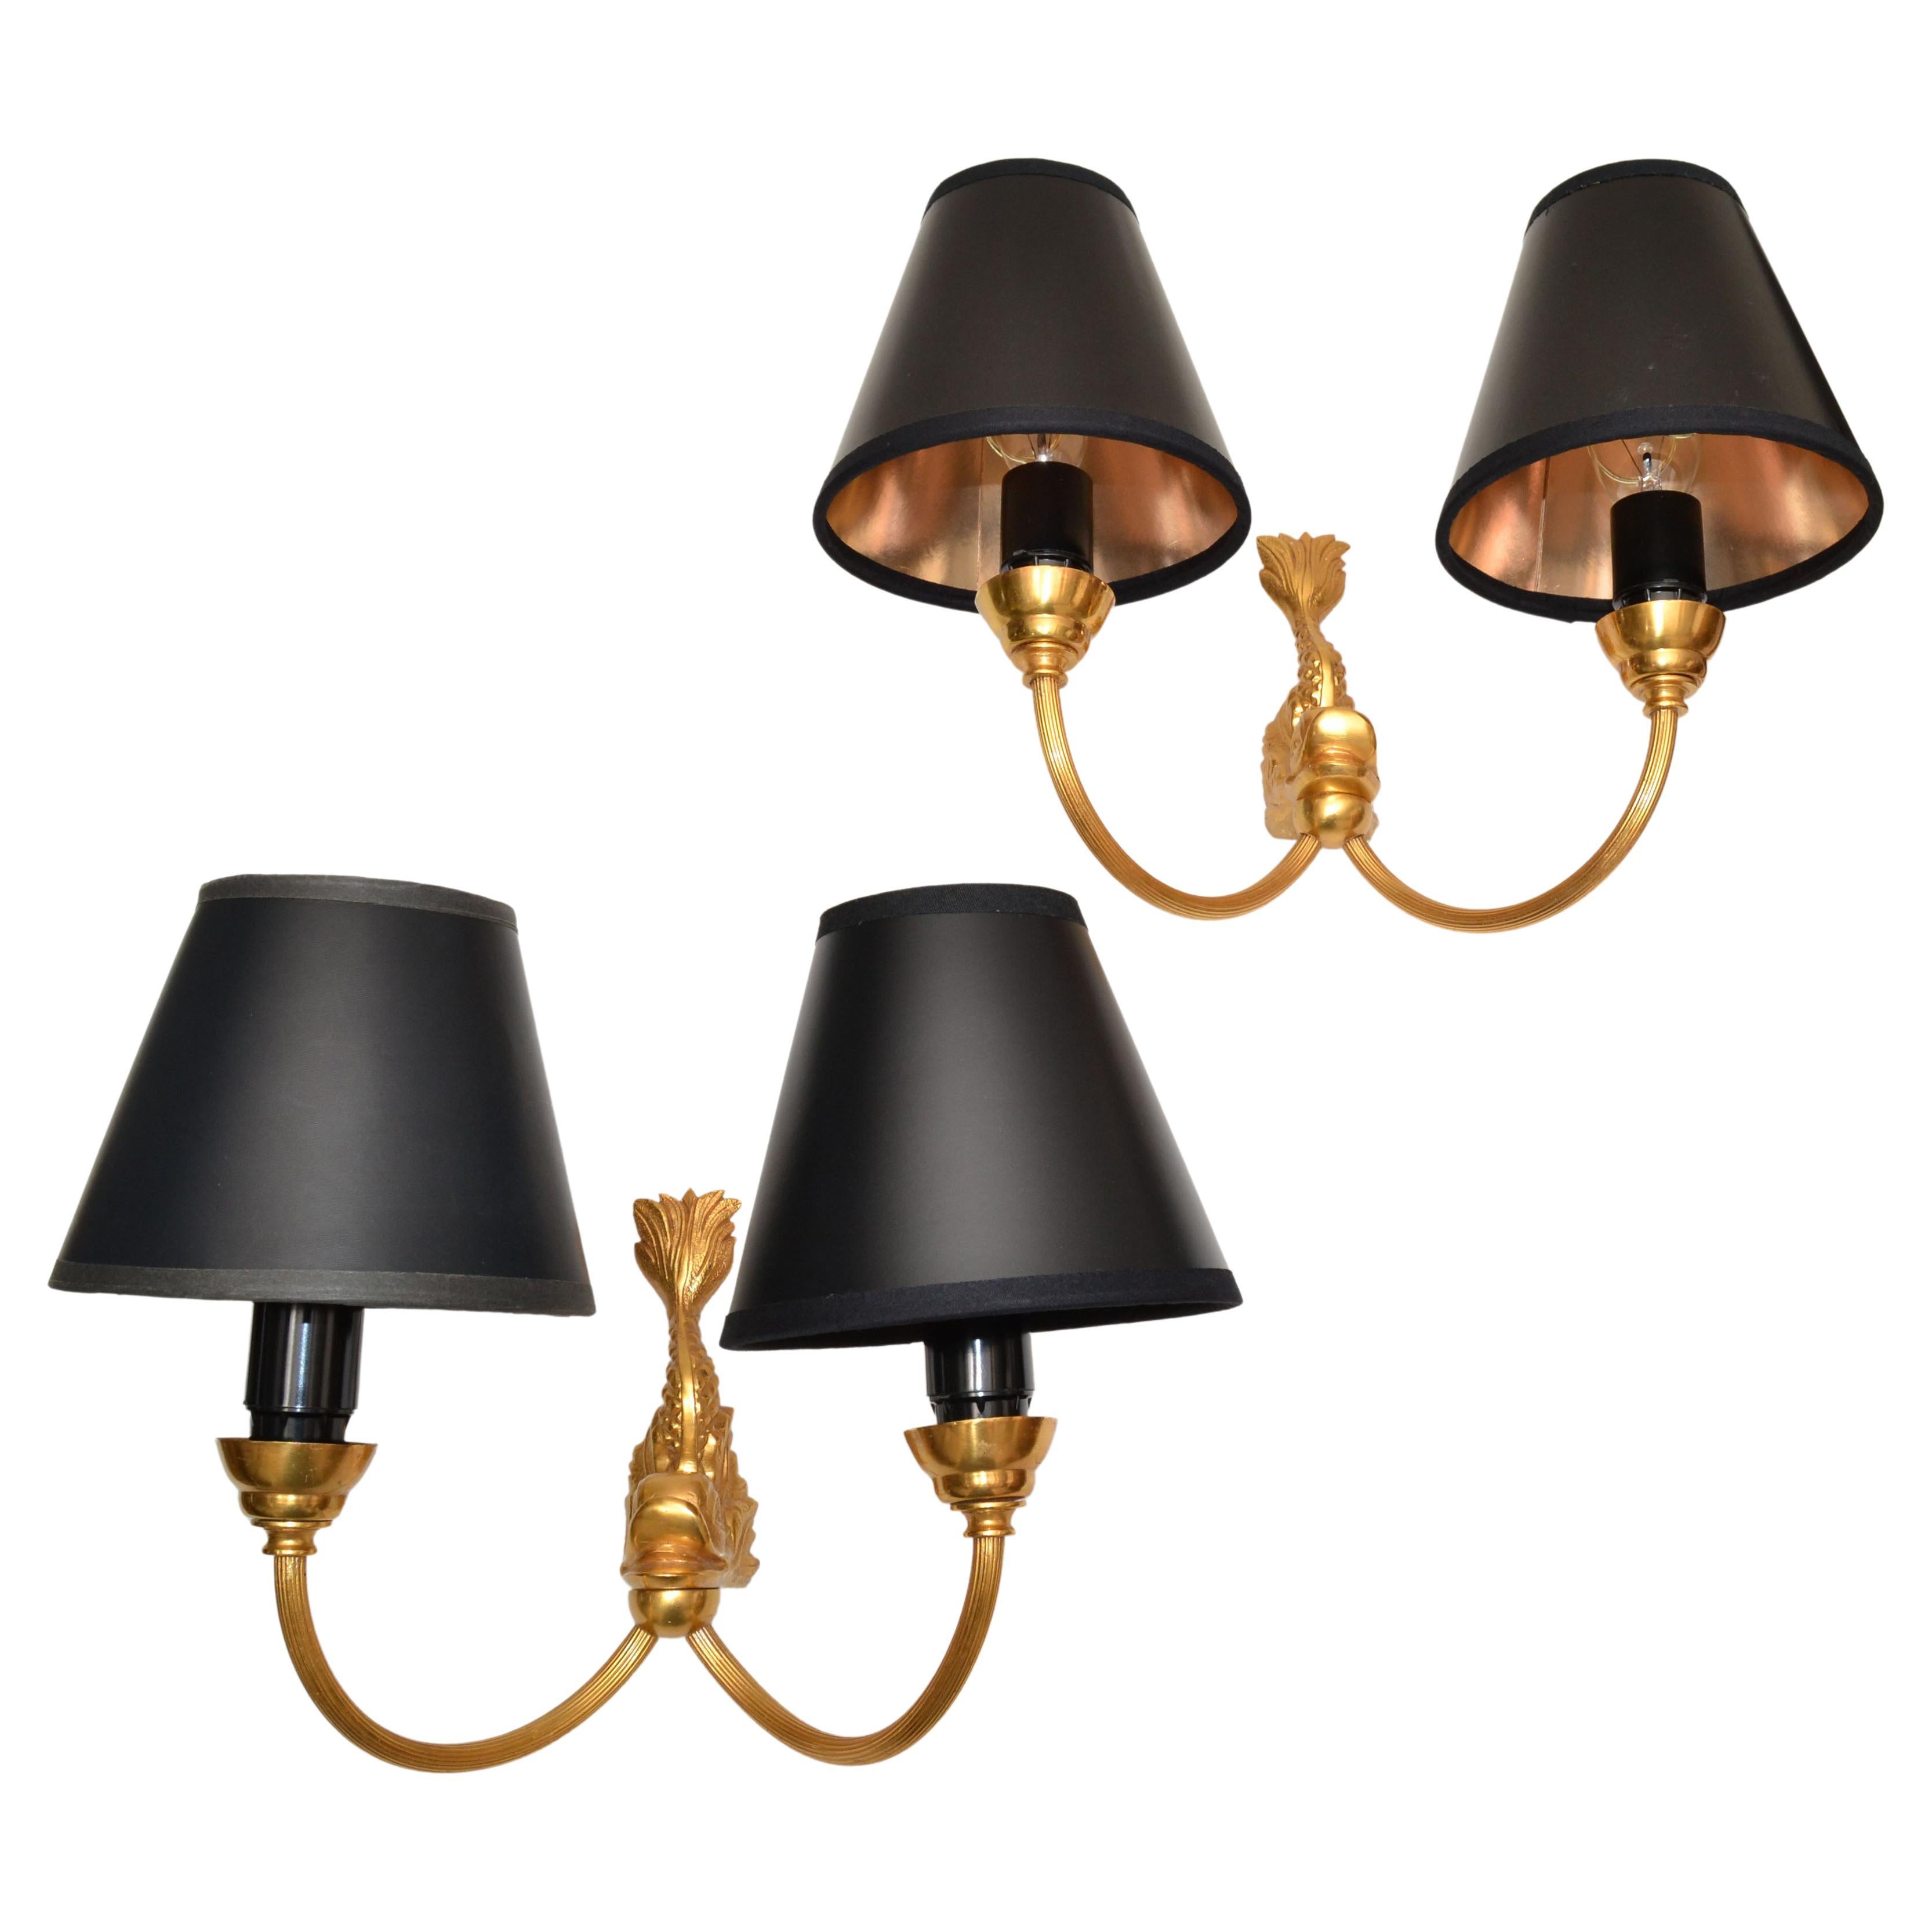 Superb pair of Maison Lancel 2 Light Brass dolphin sconces, wall lights with Black shades.
These animal sculpture lighting was made in the style of E. Guillemard 1950 in France. 
Perfect working condition and each sconce takes one bulb max. 60